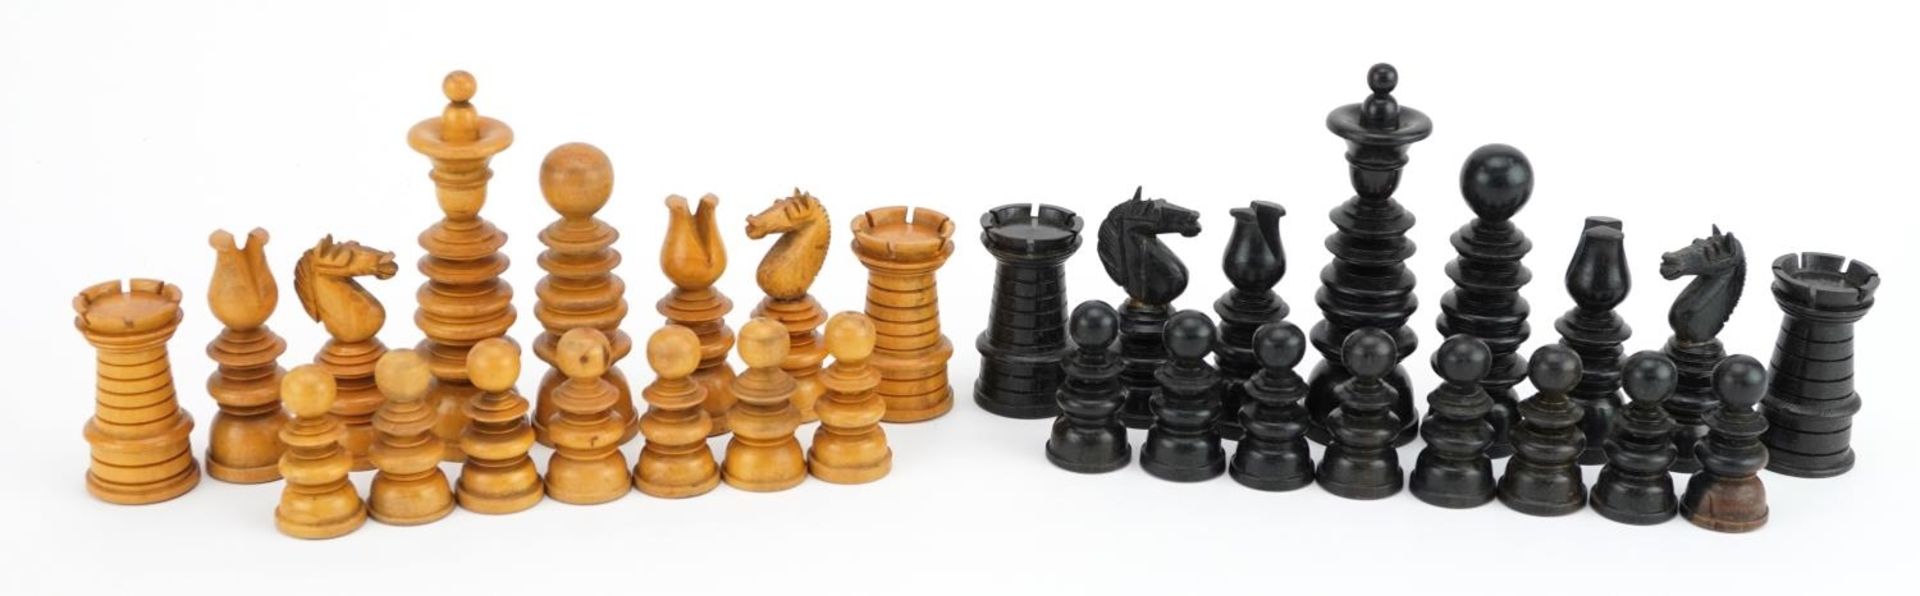 Manner of Jaques, boxwood and ebony Chessmen pattern part chess set, the largest pieces each 11cm